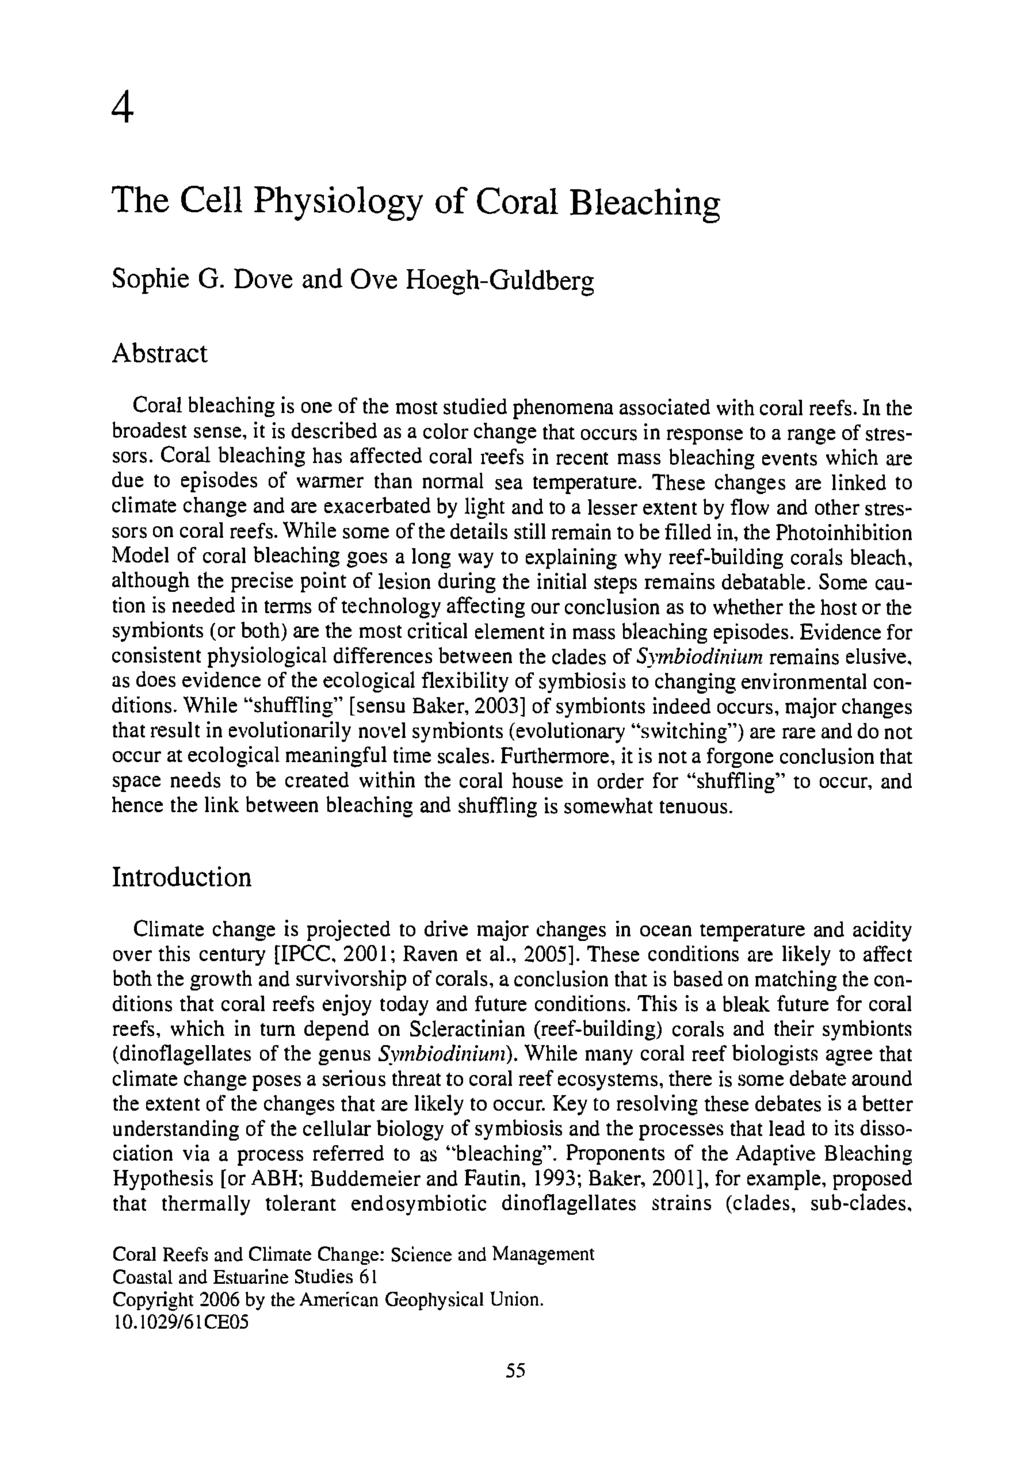 www.ebook777.com 4 The Cell Physiology of Coral Bleaching Sophie G. Dove and Ove Hoegh-Guldberg Abstract Coral bleaching is one of the most studied phenomena associated with coral reefs.